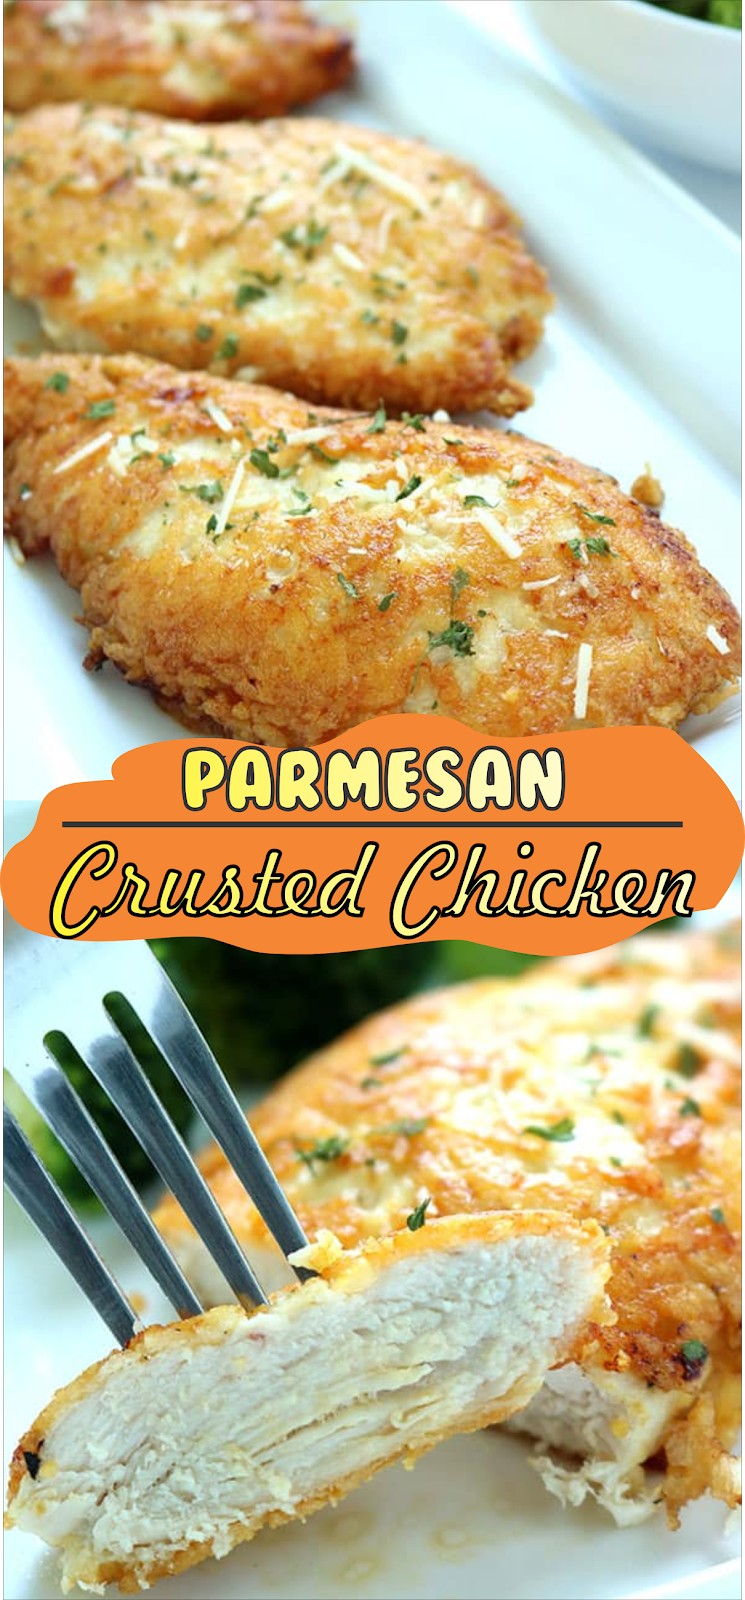 Parmesan Crusted Chicken | Floats CO